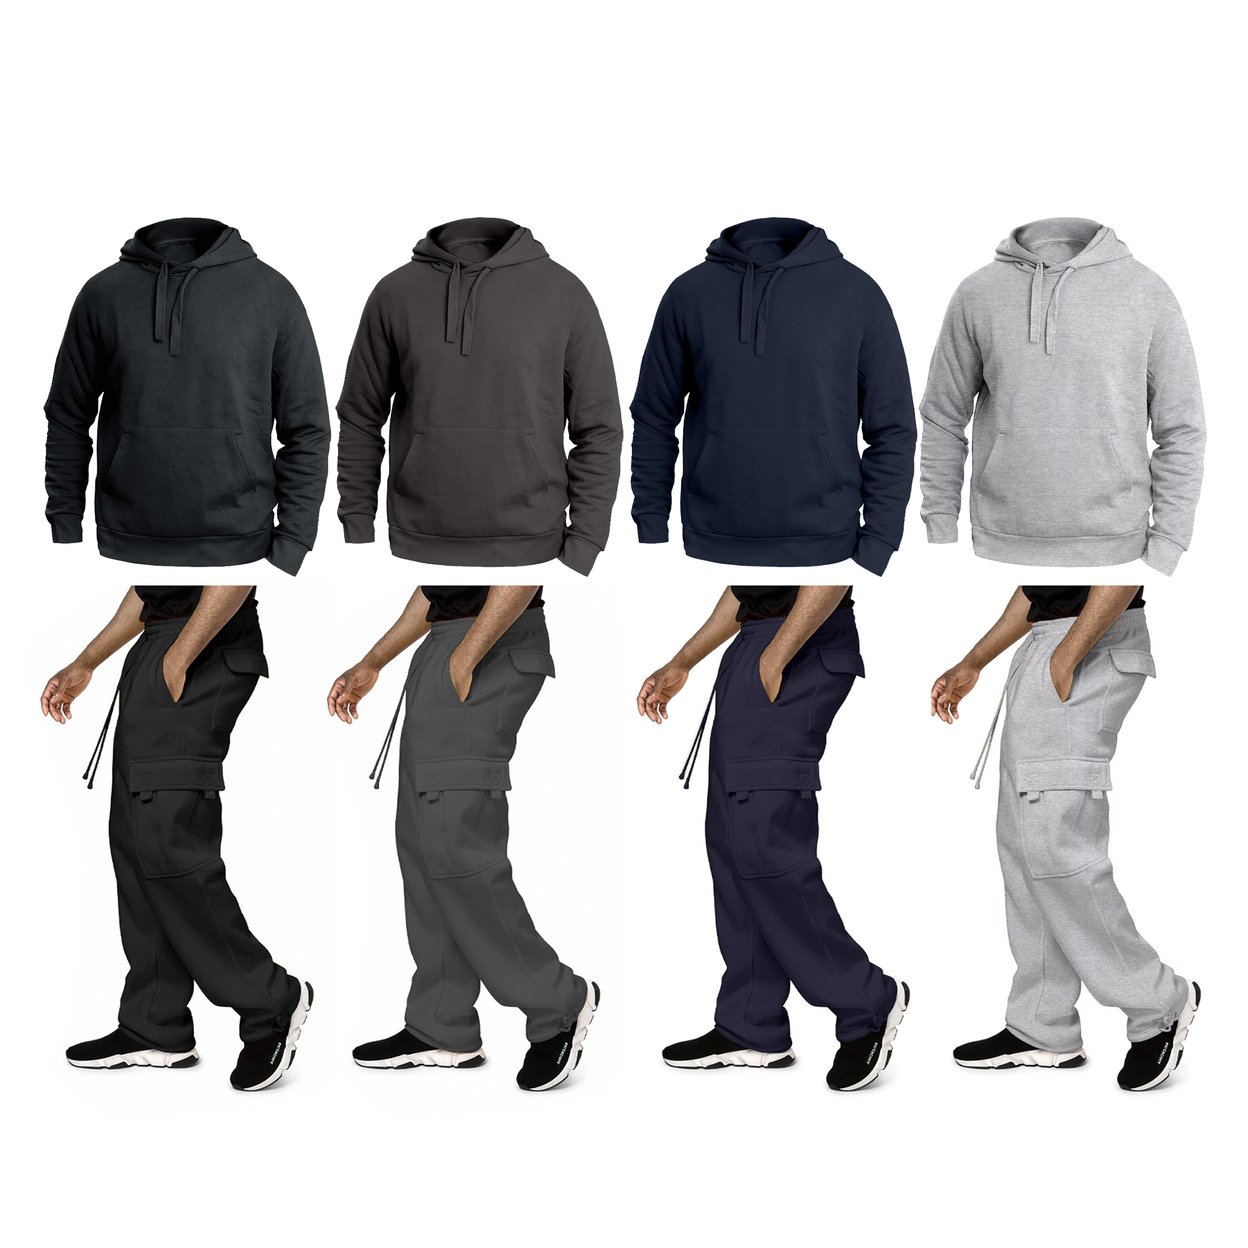 Multi-Pack: Big & Tall Men's Winter Warm Cozy Athletic Fleece Lined Multi-Pocket Cargo Sweatsuit - Charcoal, 2-pack, Small